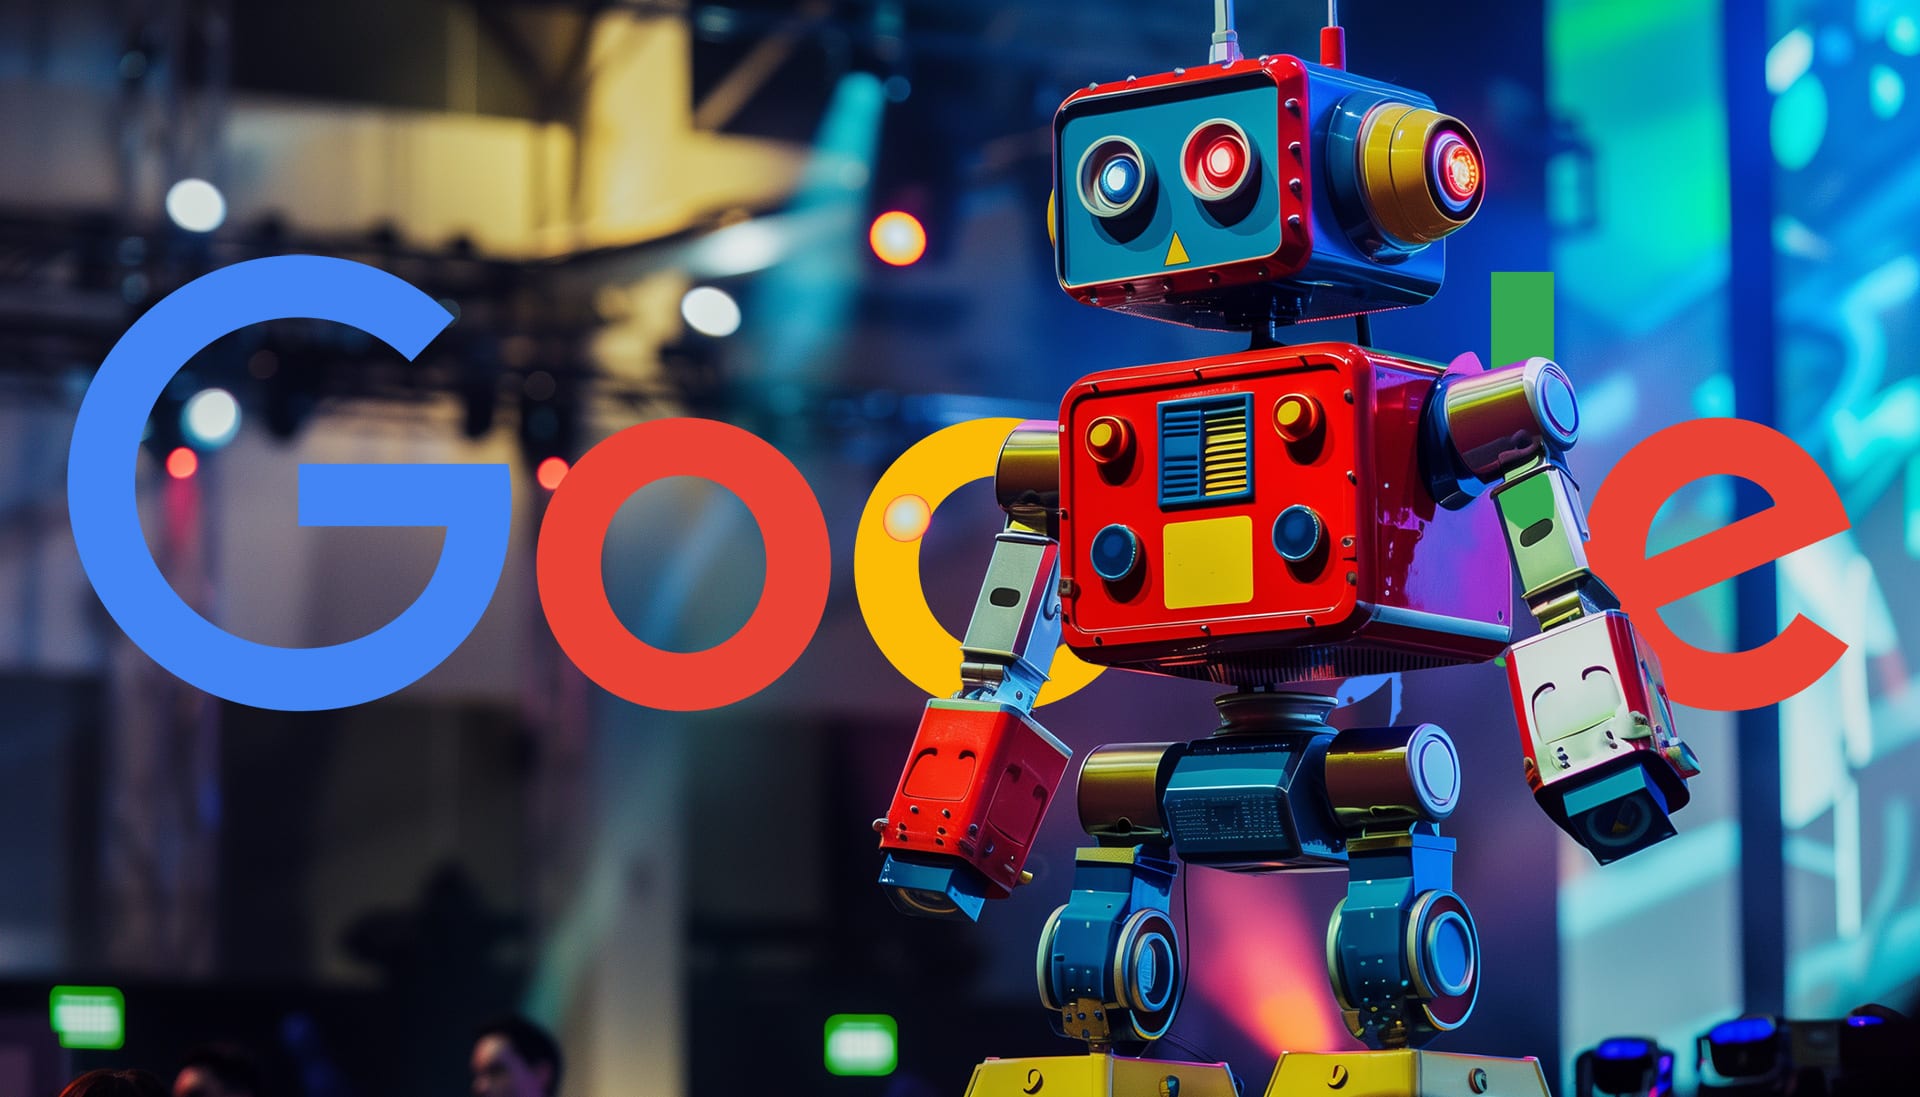 #Google still has not announced a launch date for SGE